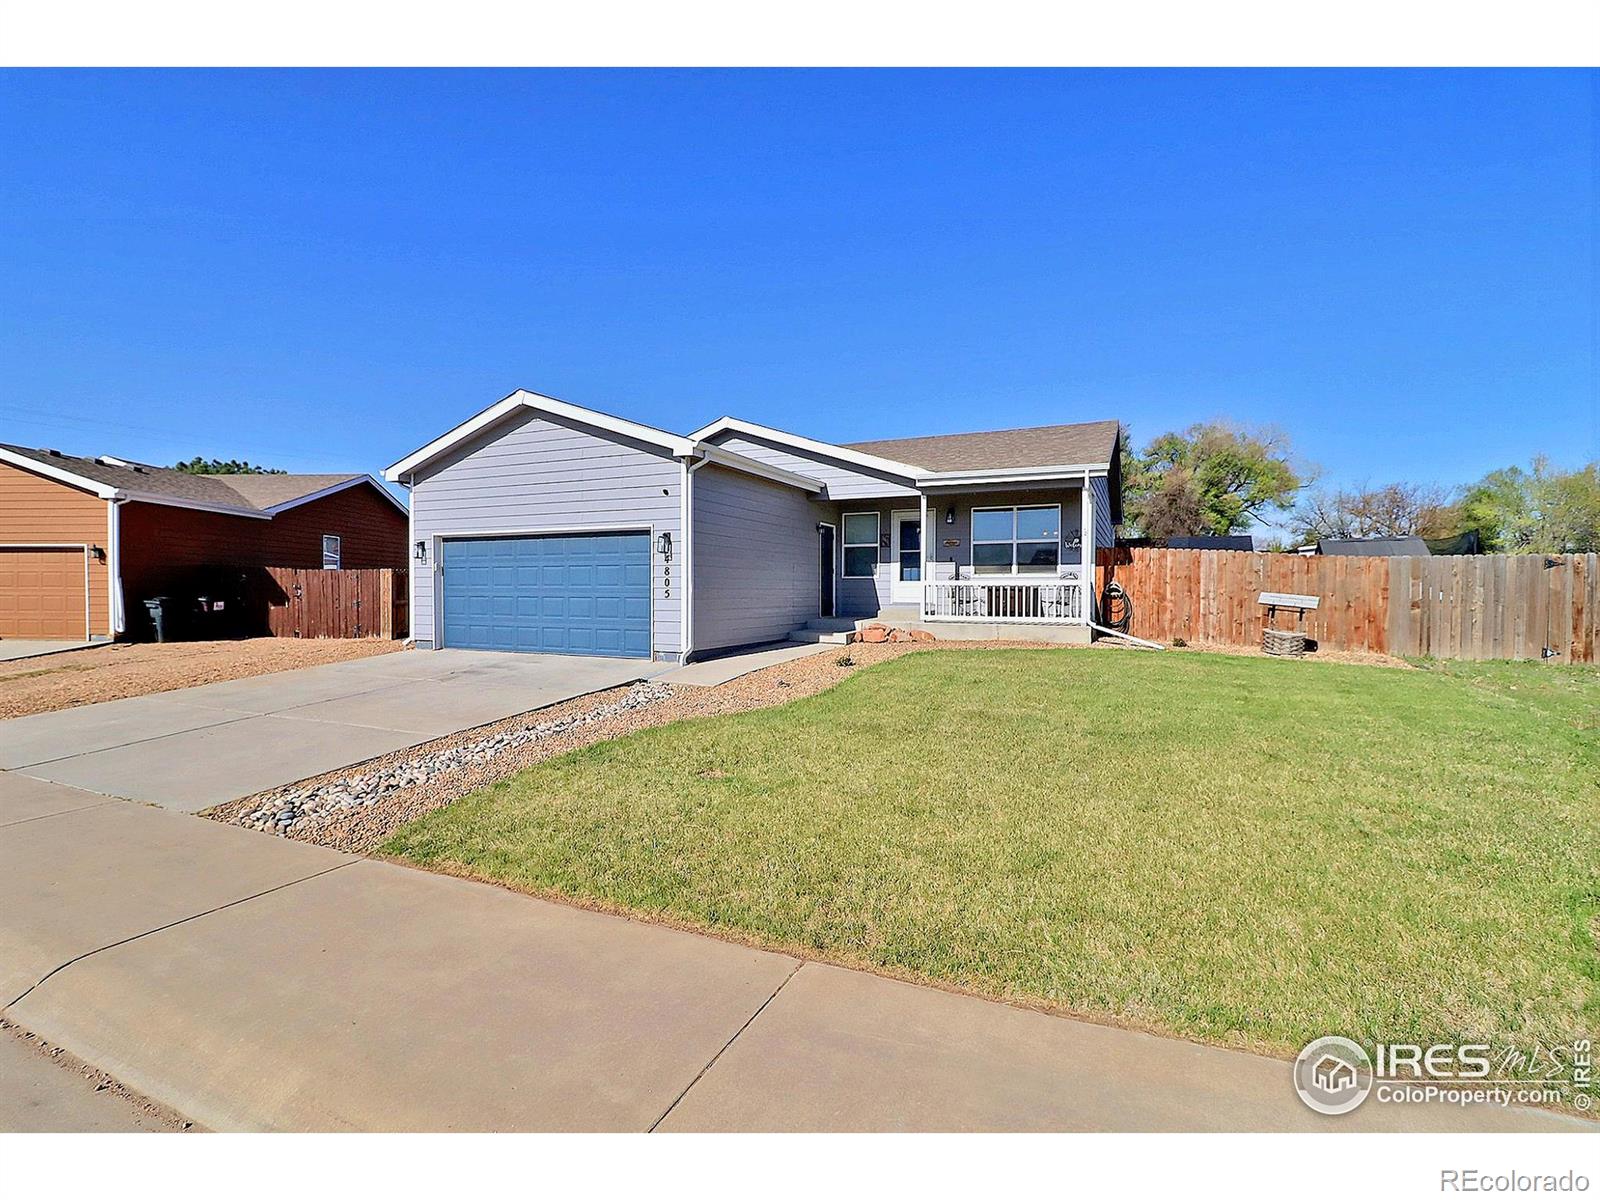 Report Image for 4805  Everest Place,Greeley, Colorado